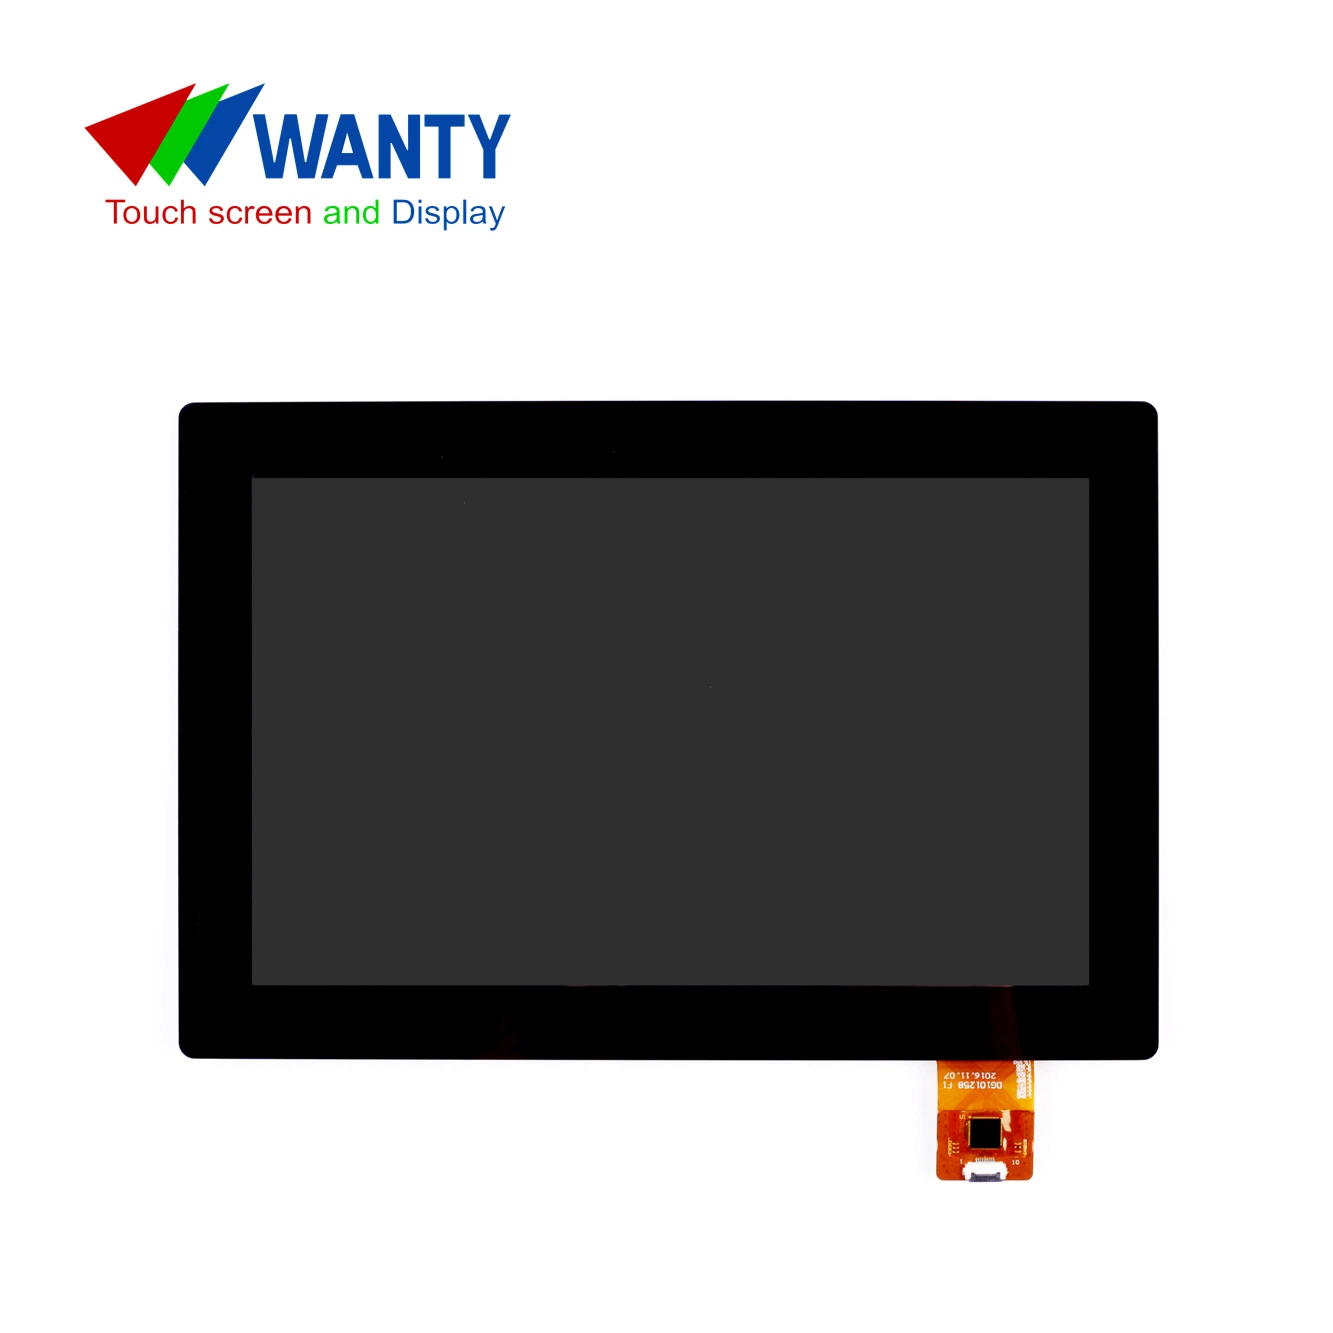 China Factory Manufacturer OEM ODM Custom 11.6 Inch1920x1080 FHD High Brightness Sunlight Readable TFT LCD with USB 10points Capacitive Touch Screen Panel